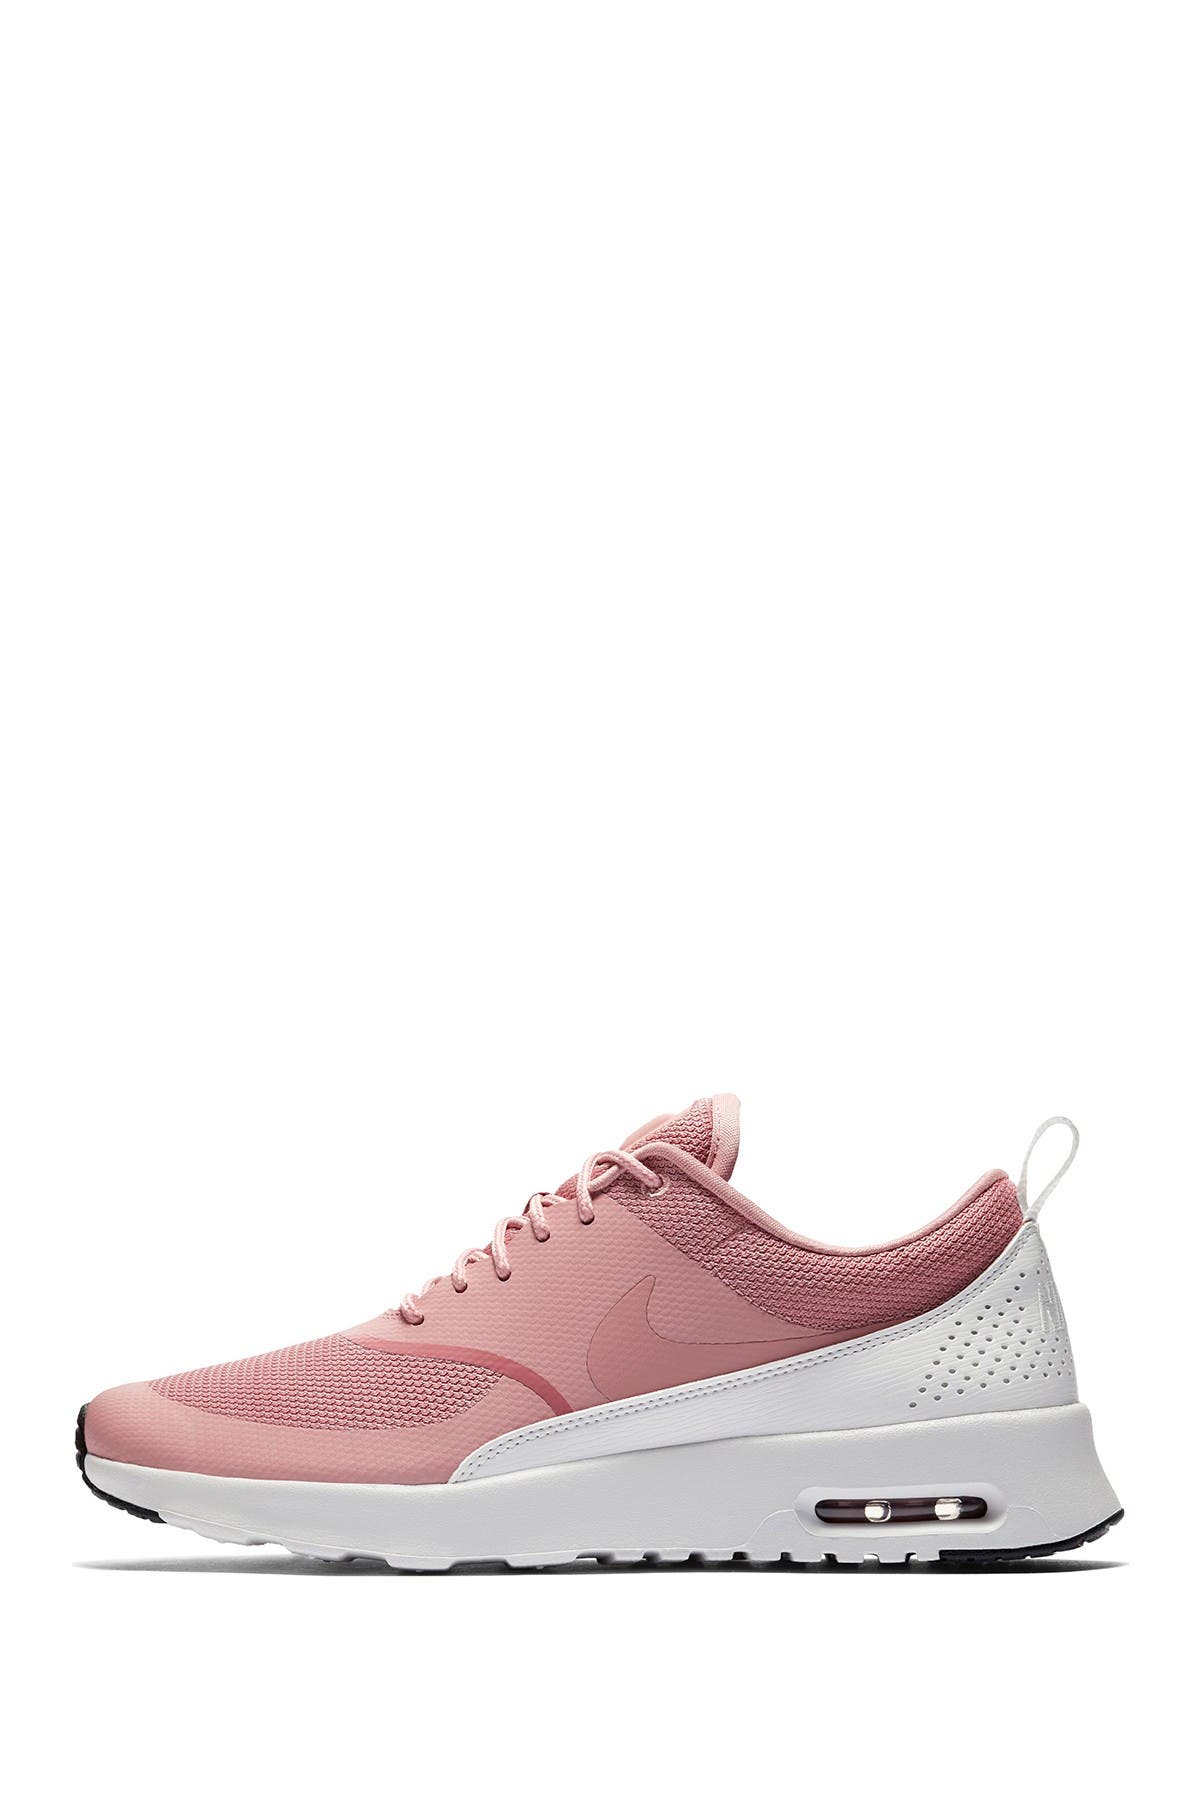 nike pale pink air max thea trainers